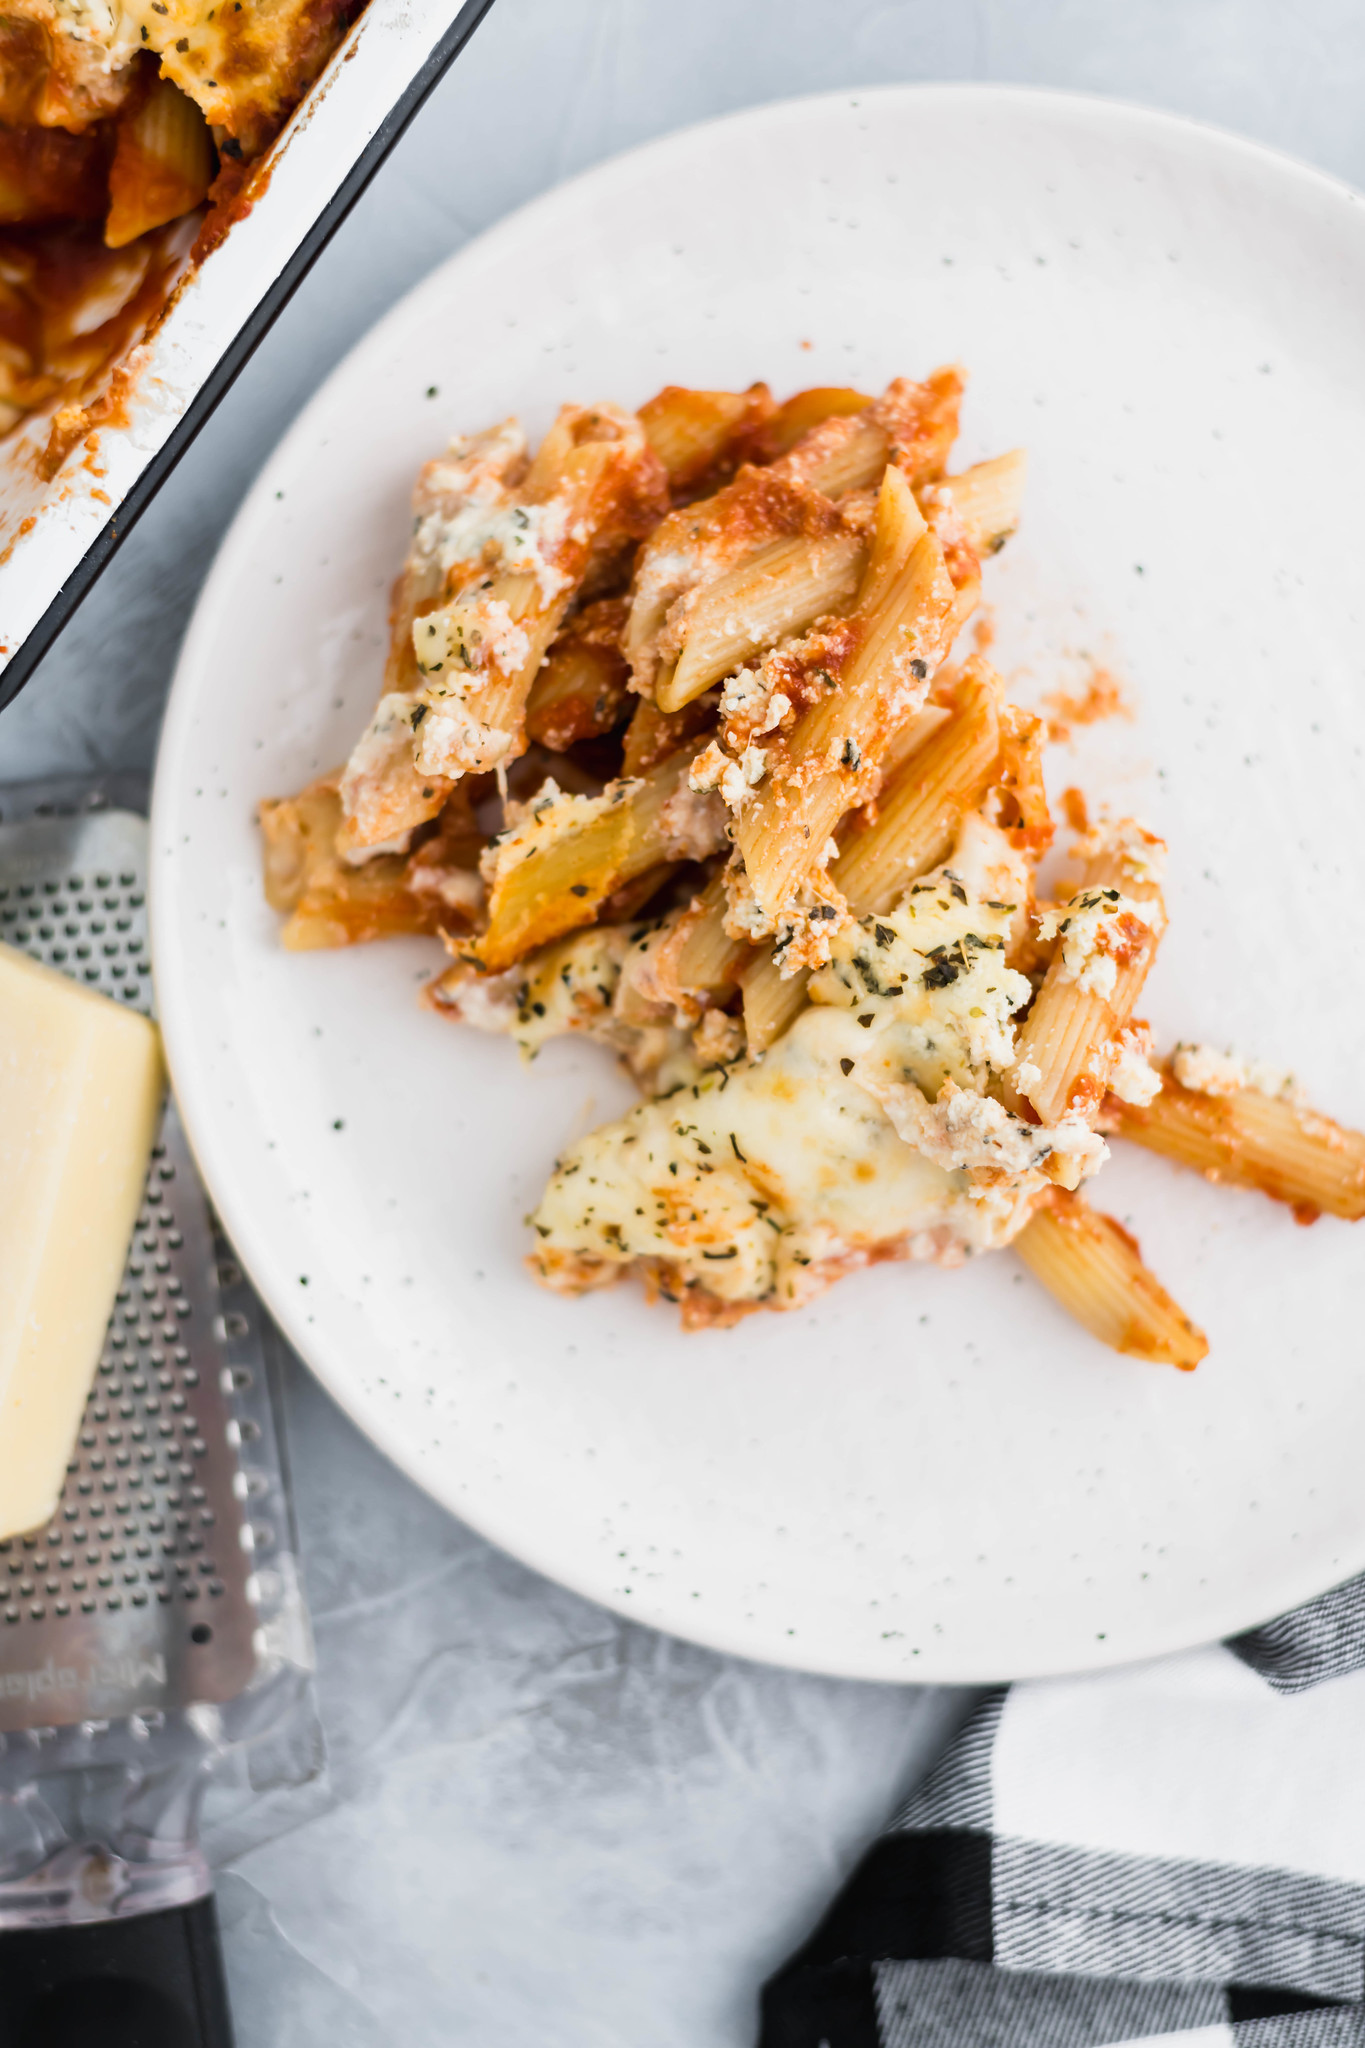 Get dinner on the table quick with this Easy Baked Penne. Penne with spaghetti sauce topped with creamy ricotta and freshly shredded mozzarella cheese. This weeknight dish is ready in 35 minutes. Just a few ingredients required for this easy baked pasta recipe.